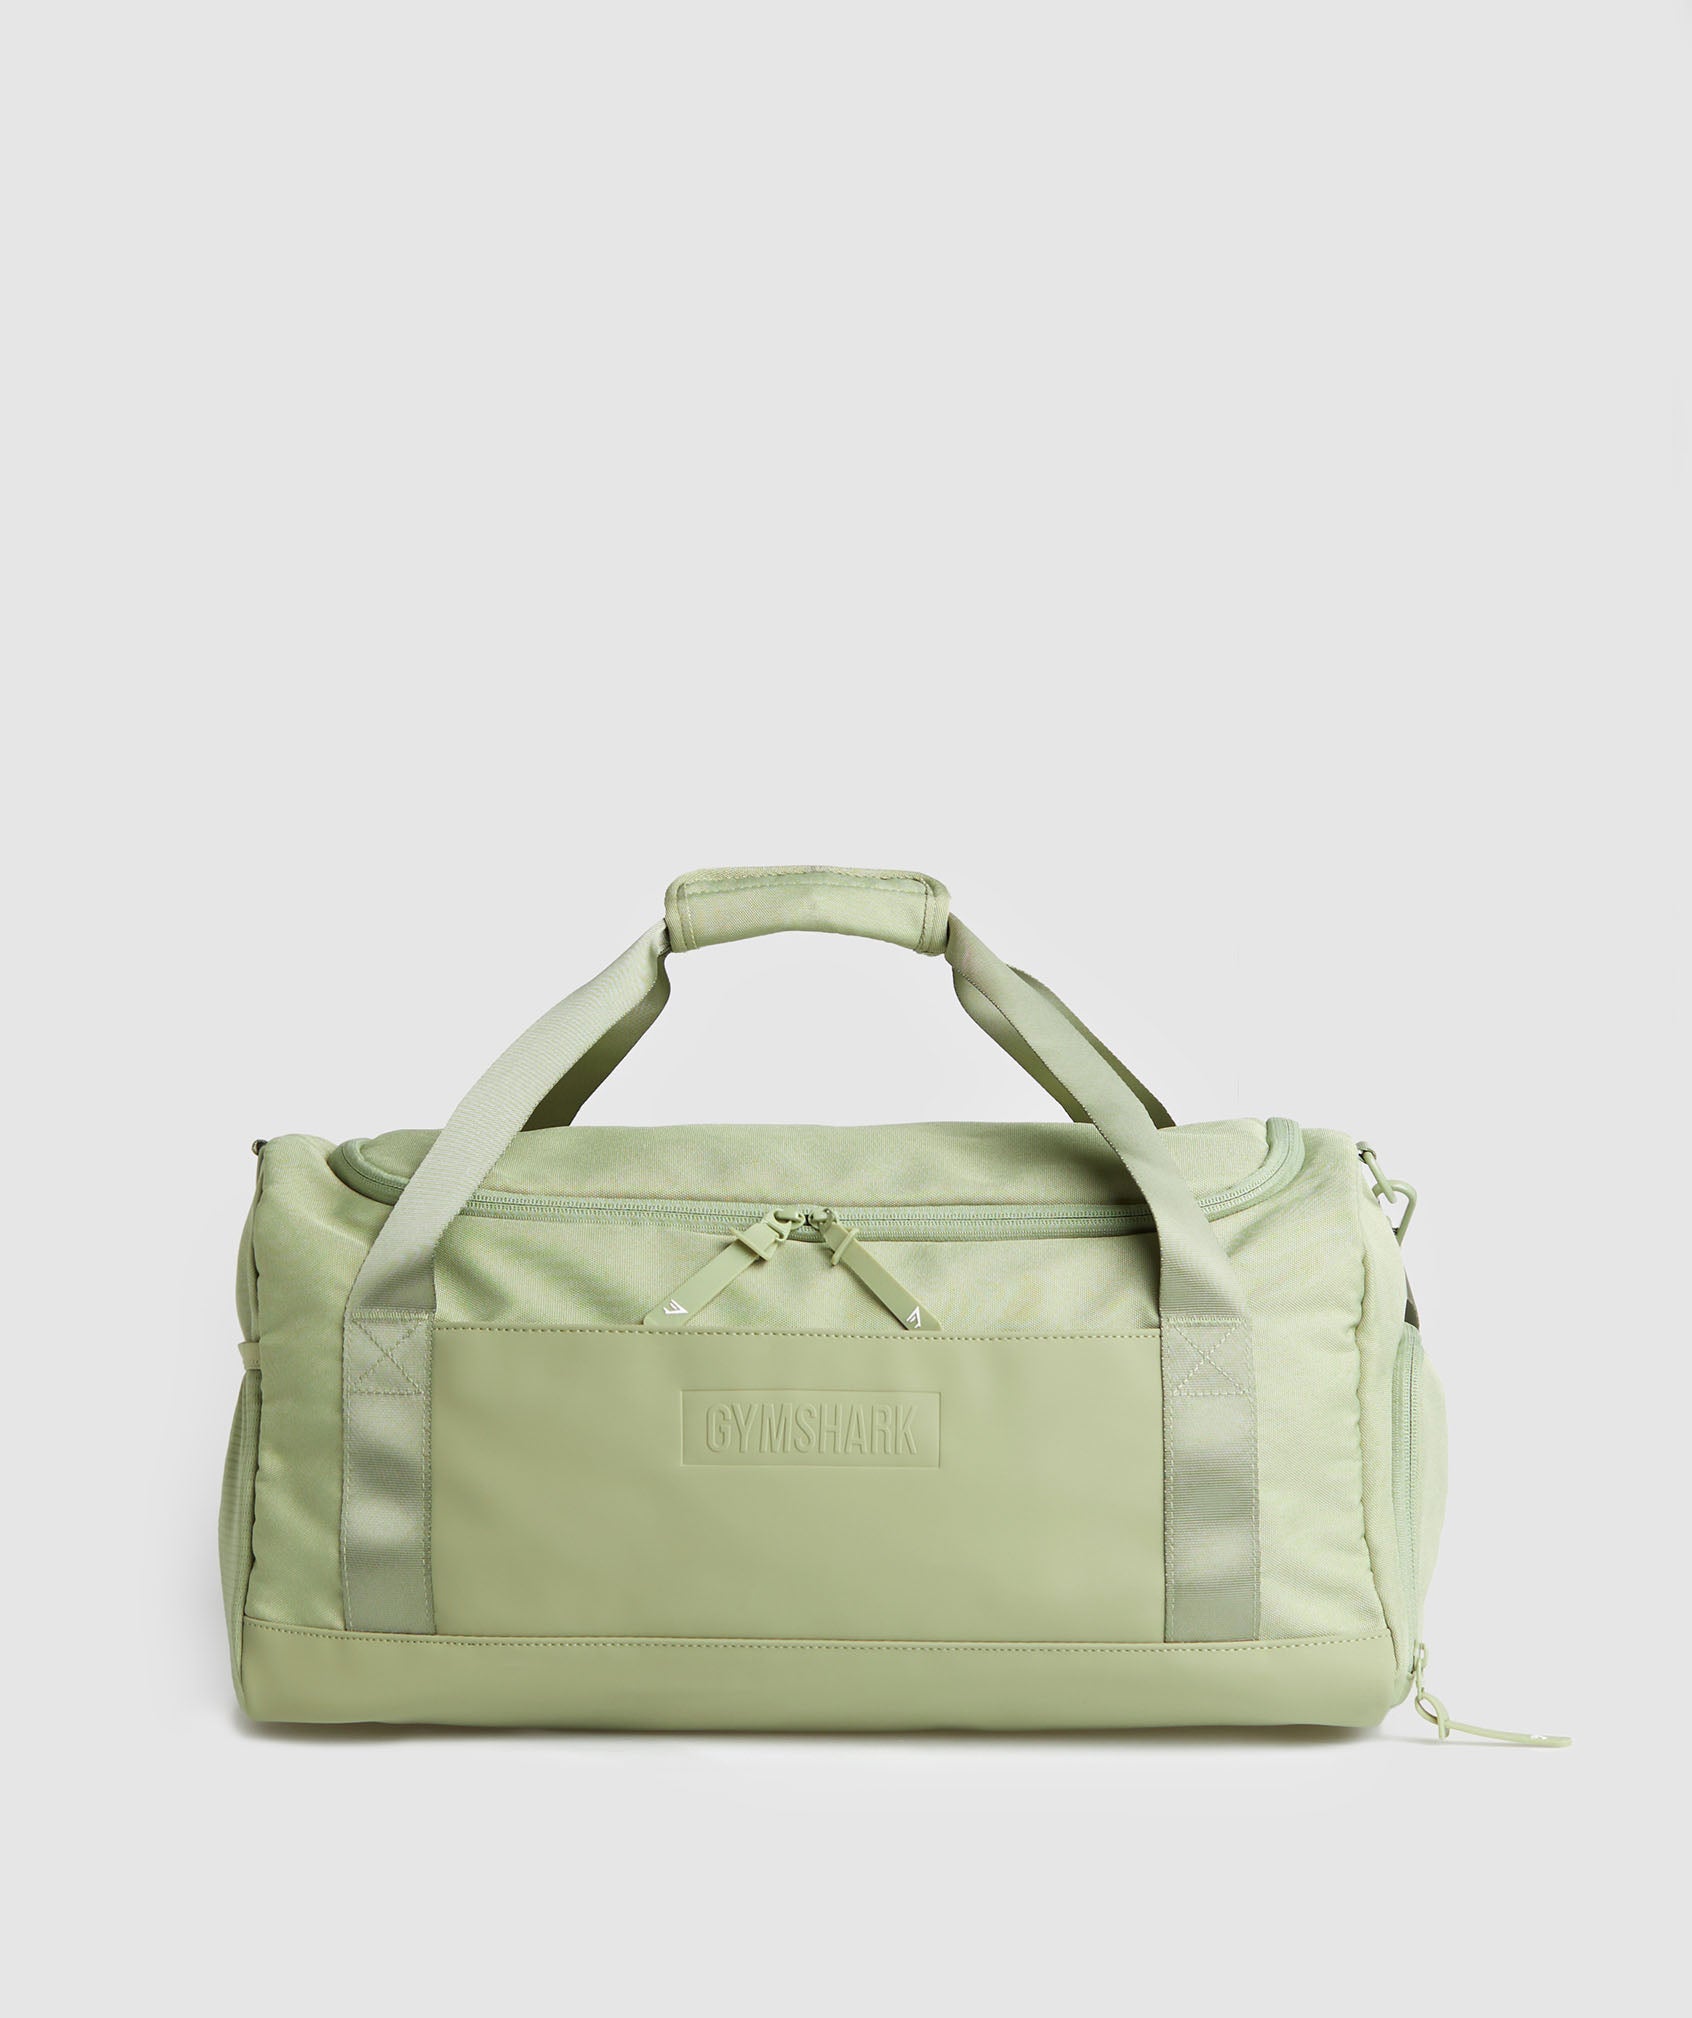 Everyday Holdall Small in {{variantColor} is out of stock